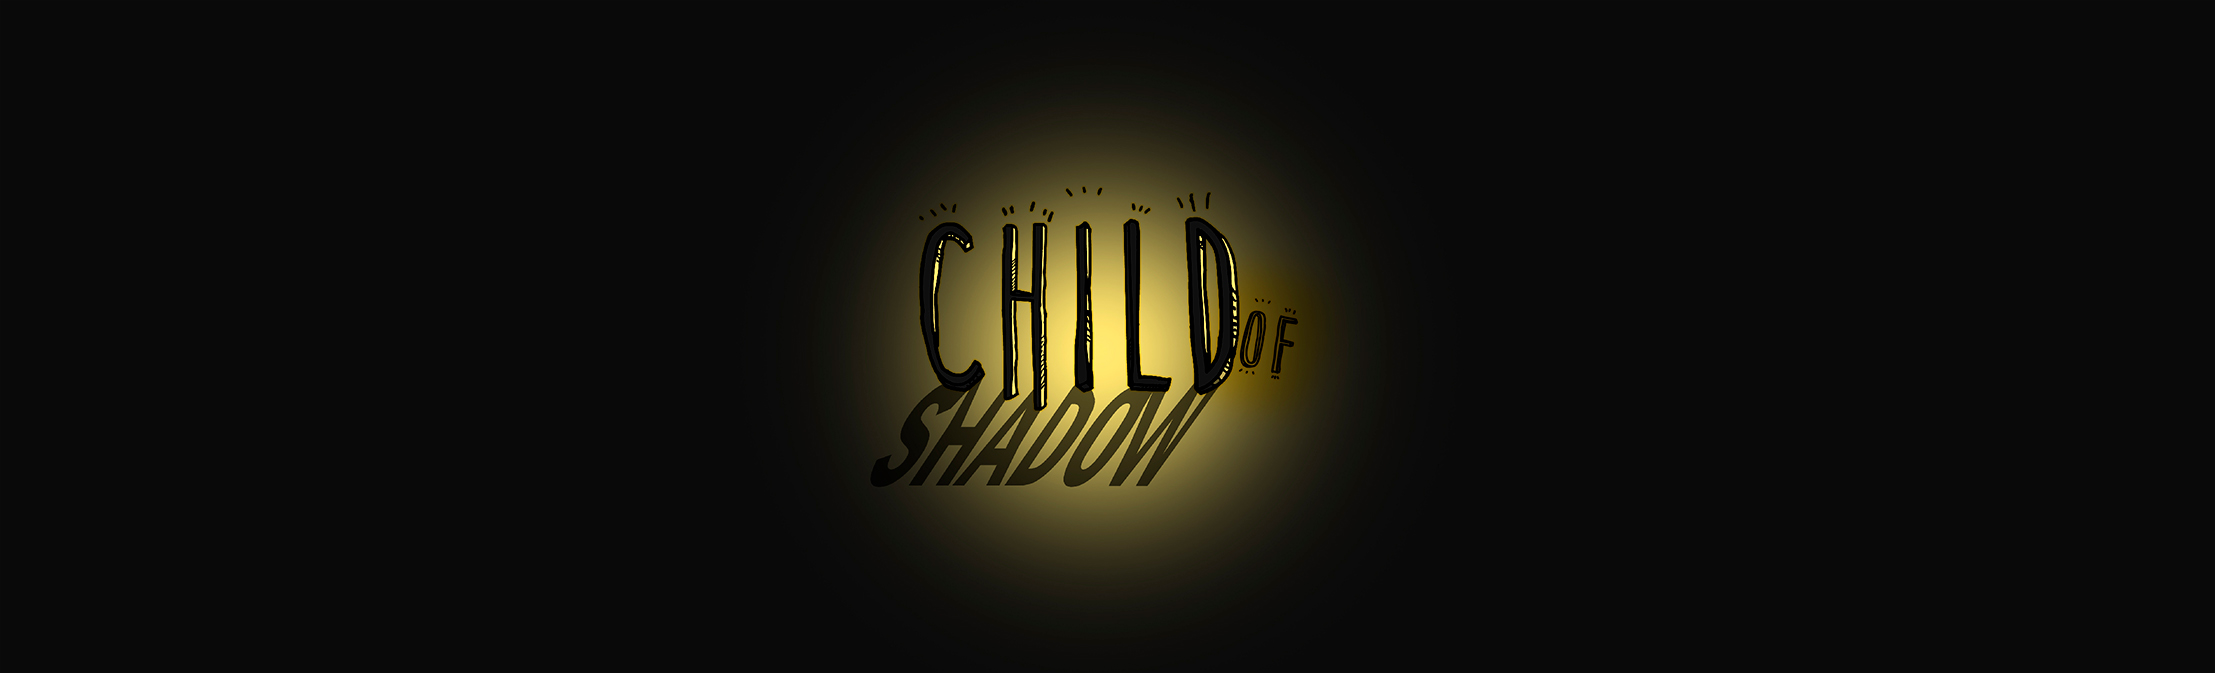 Child of Shadow